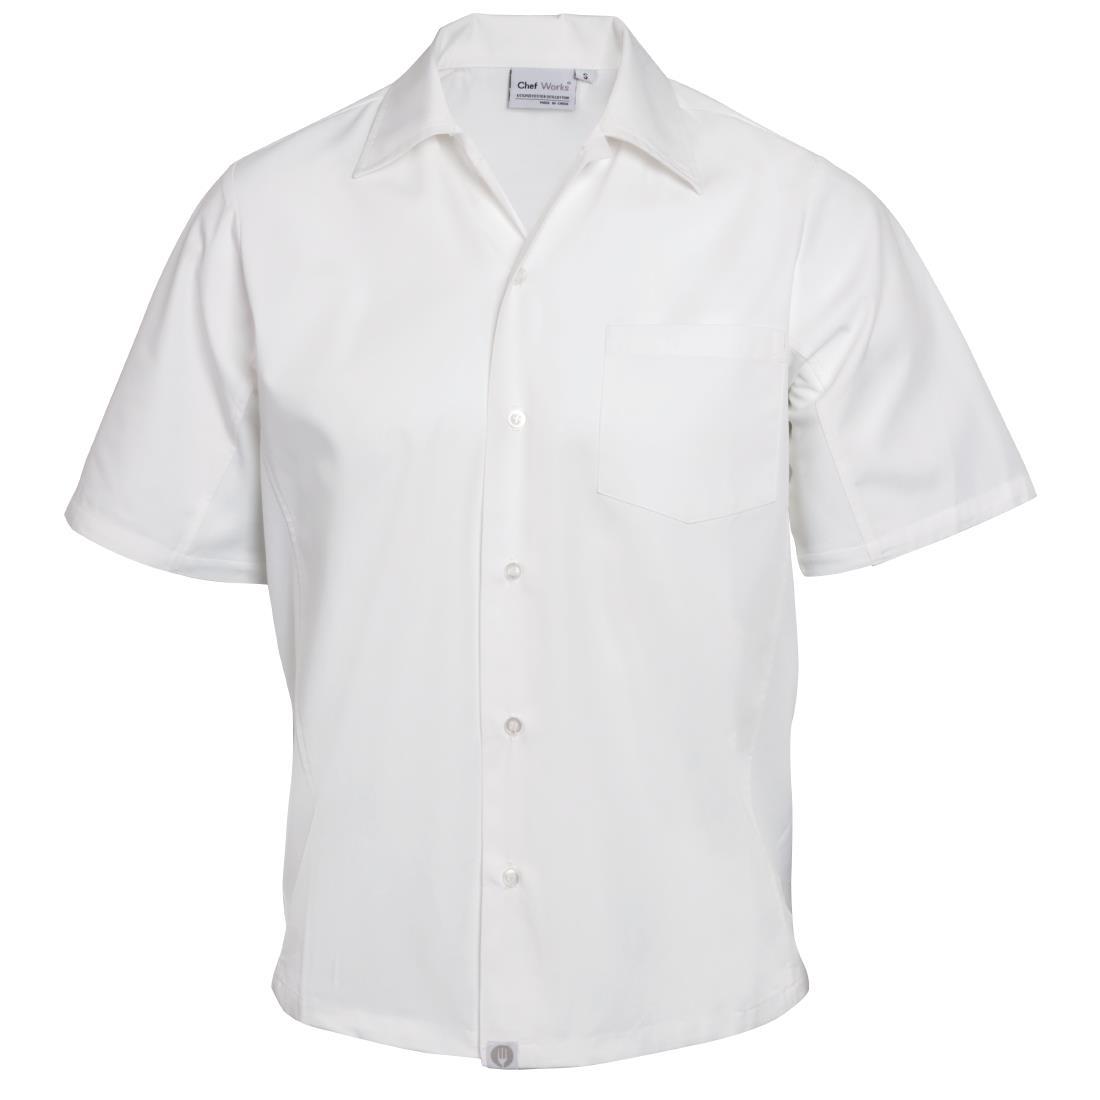 Chef Works Unisex Cool Vent Chefs Shirt White XS